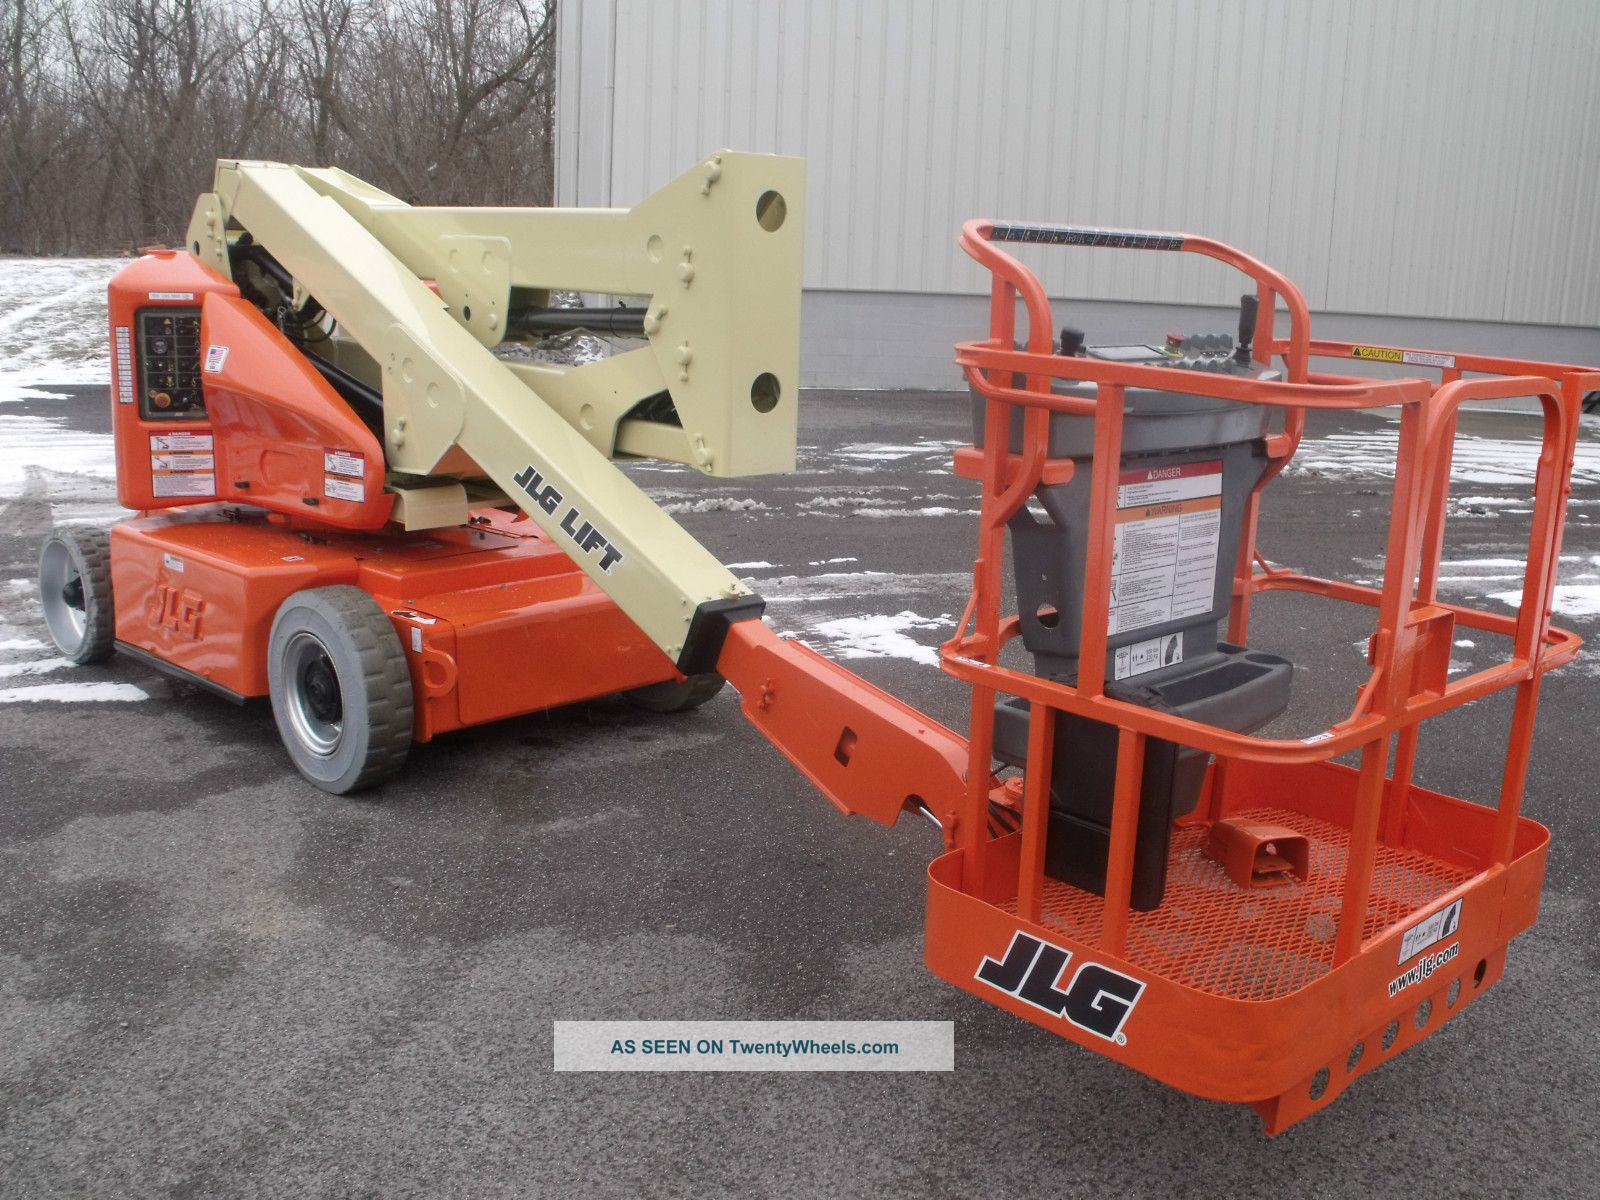 Jlg E400an Aerial Manlift Boom Lift Man Boomlift Painted Works In Narrow Is...